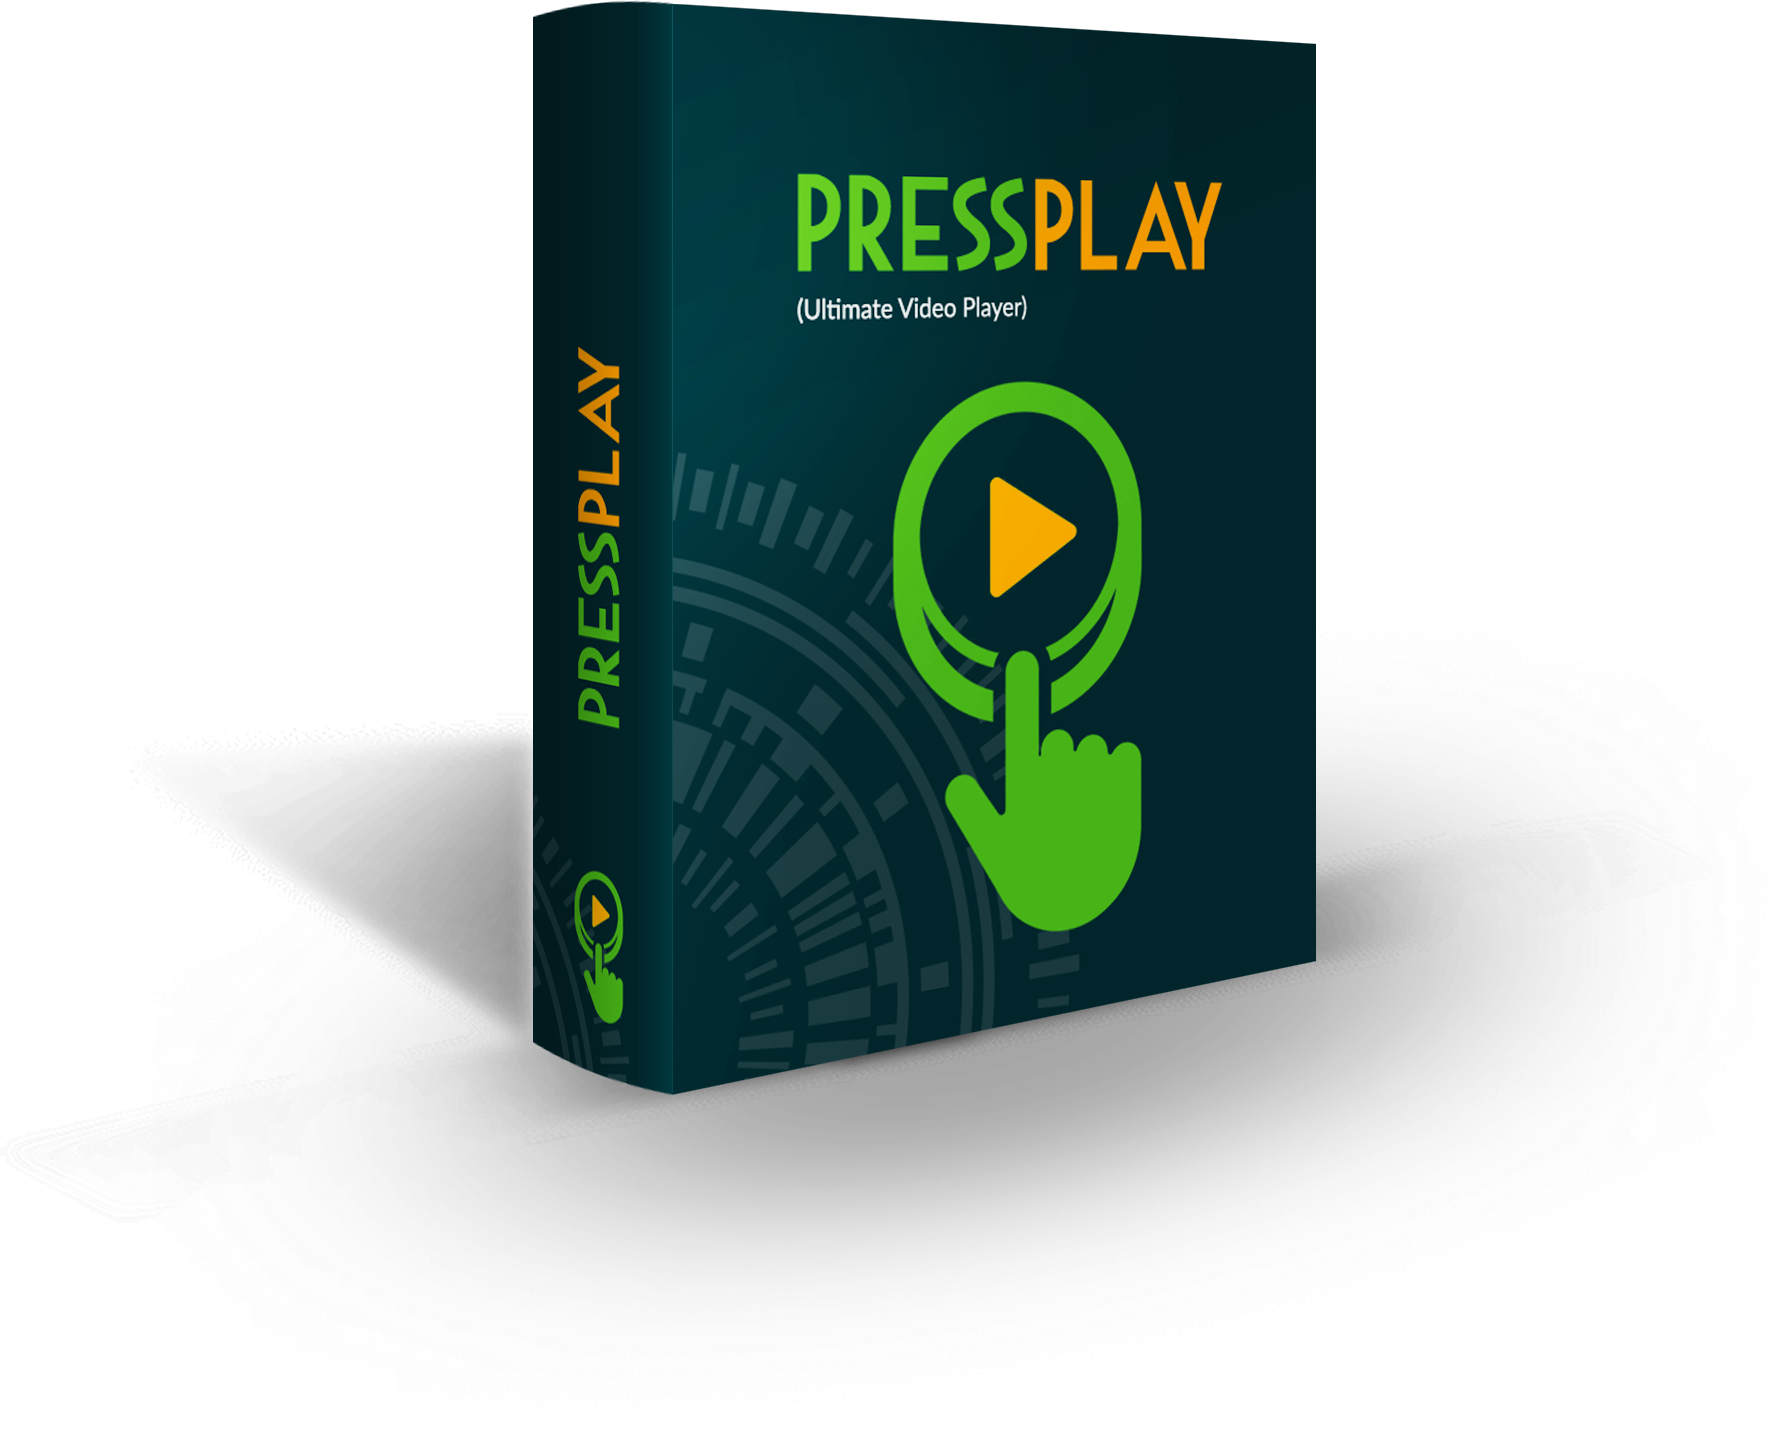 Press Play (Ultimate Video Player)